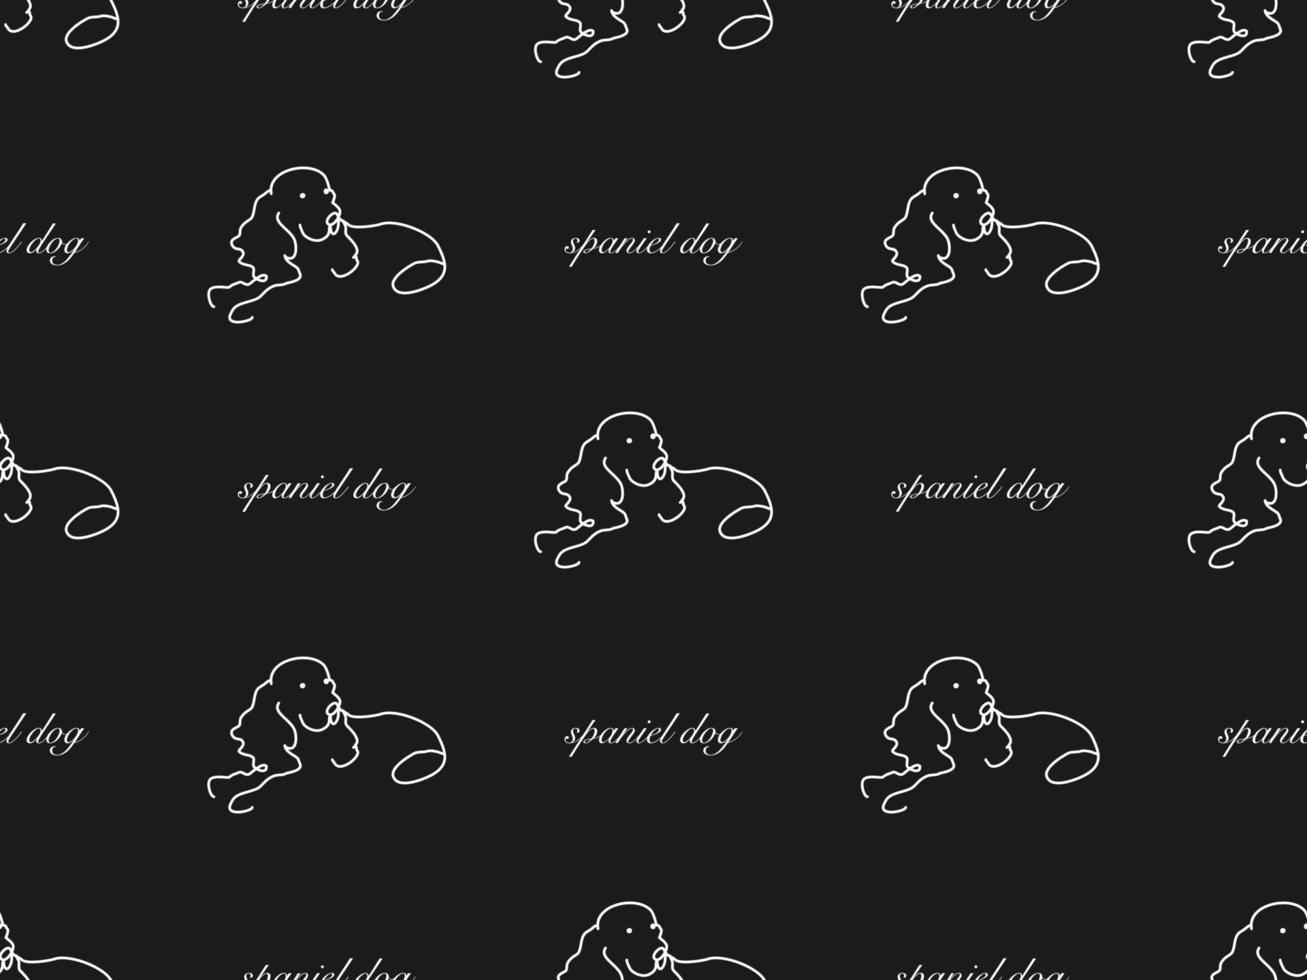 Spaniel dog cartoon character seamless pattern on black background vector